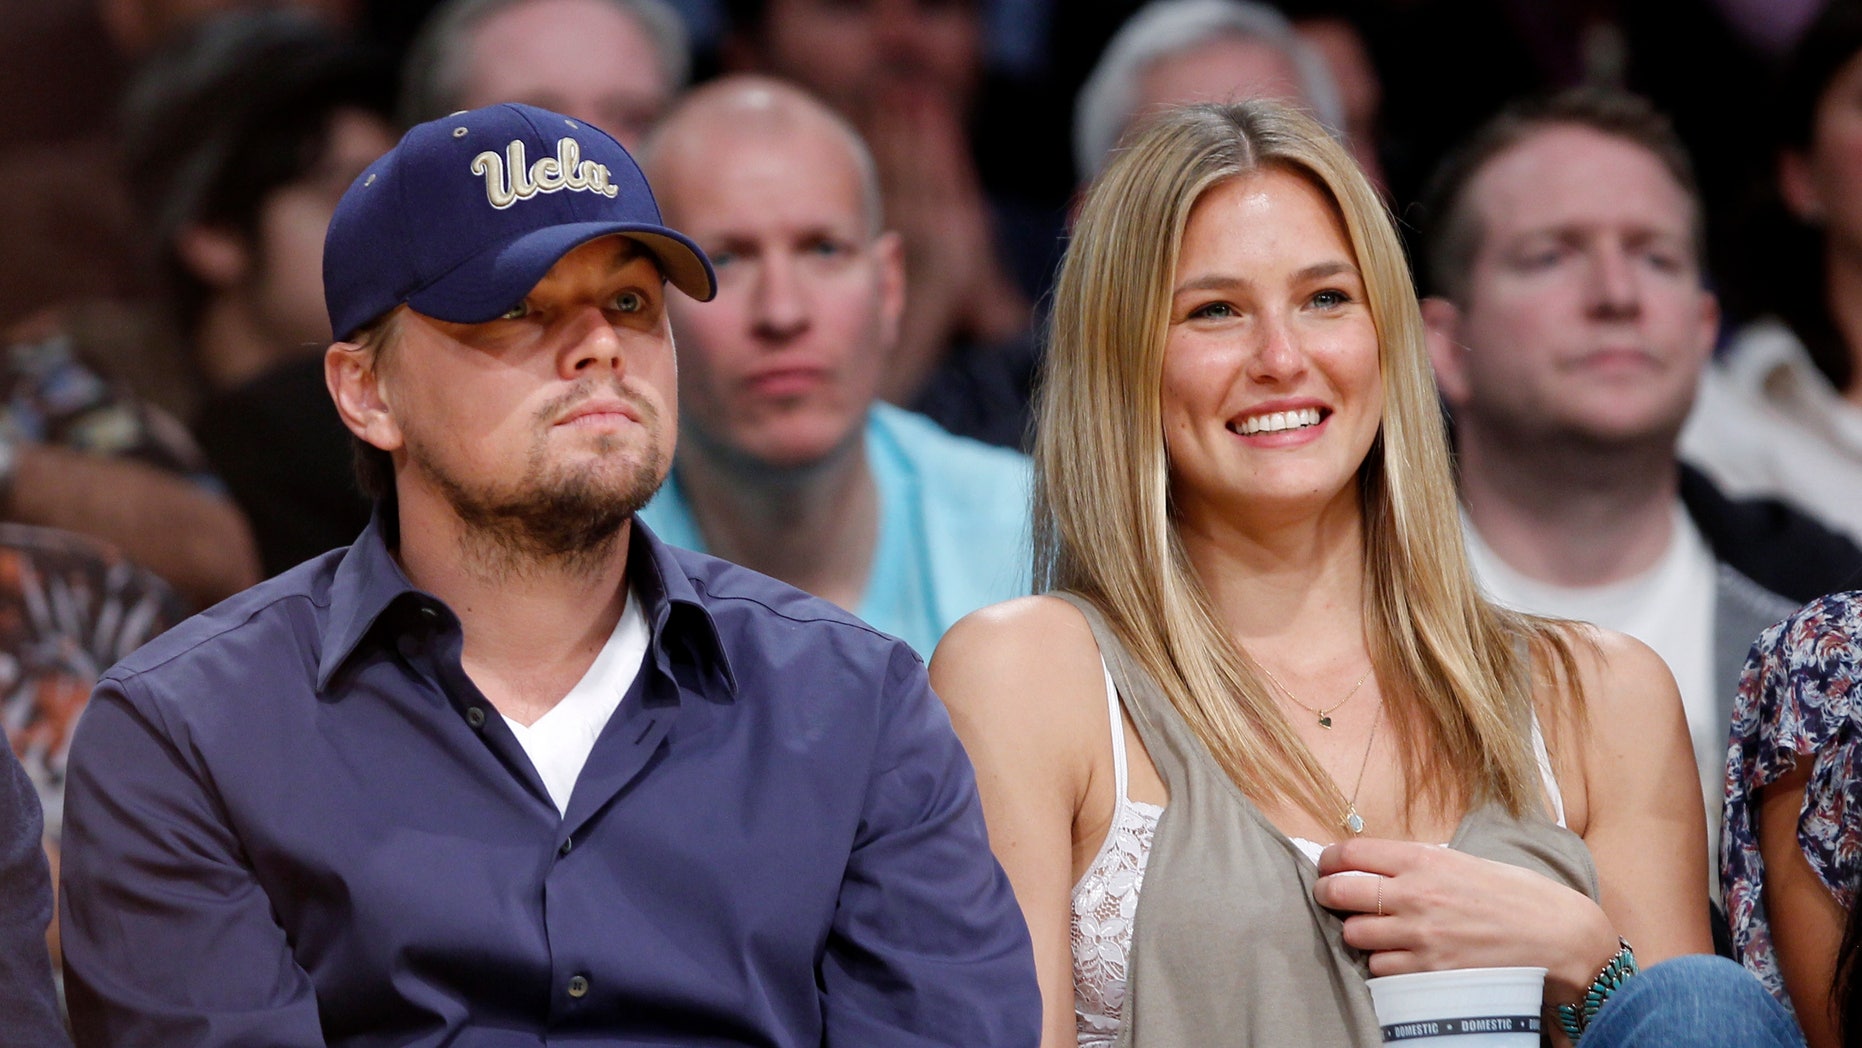 Leonardo DiCaprio is single again: Here's a look at his recent relationships | Fox News